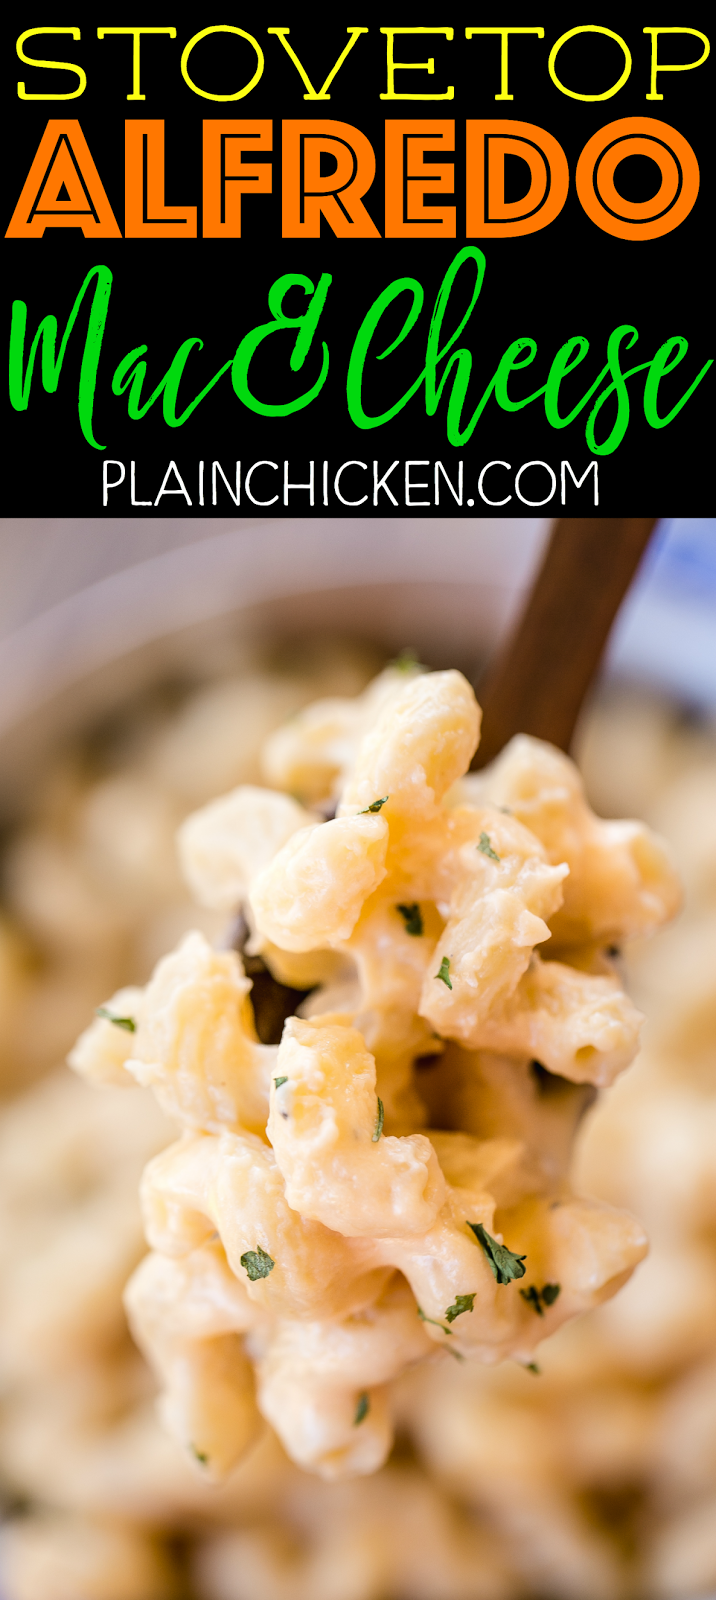 Stovetop Alfredo Mac & Cheese - ready in 10 minutes! We make this all the time! SO easy and SOOOO delicious! Only 5 ingredients! Pasta tossed in jarred Alfredo sauce, cheddar cheese, parmesan cheese and garlic. Perfect weeknight side dish. Great with steak, chicken and pork. 